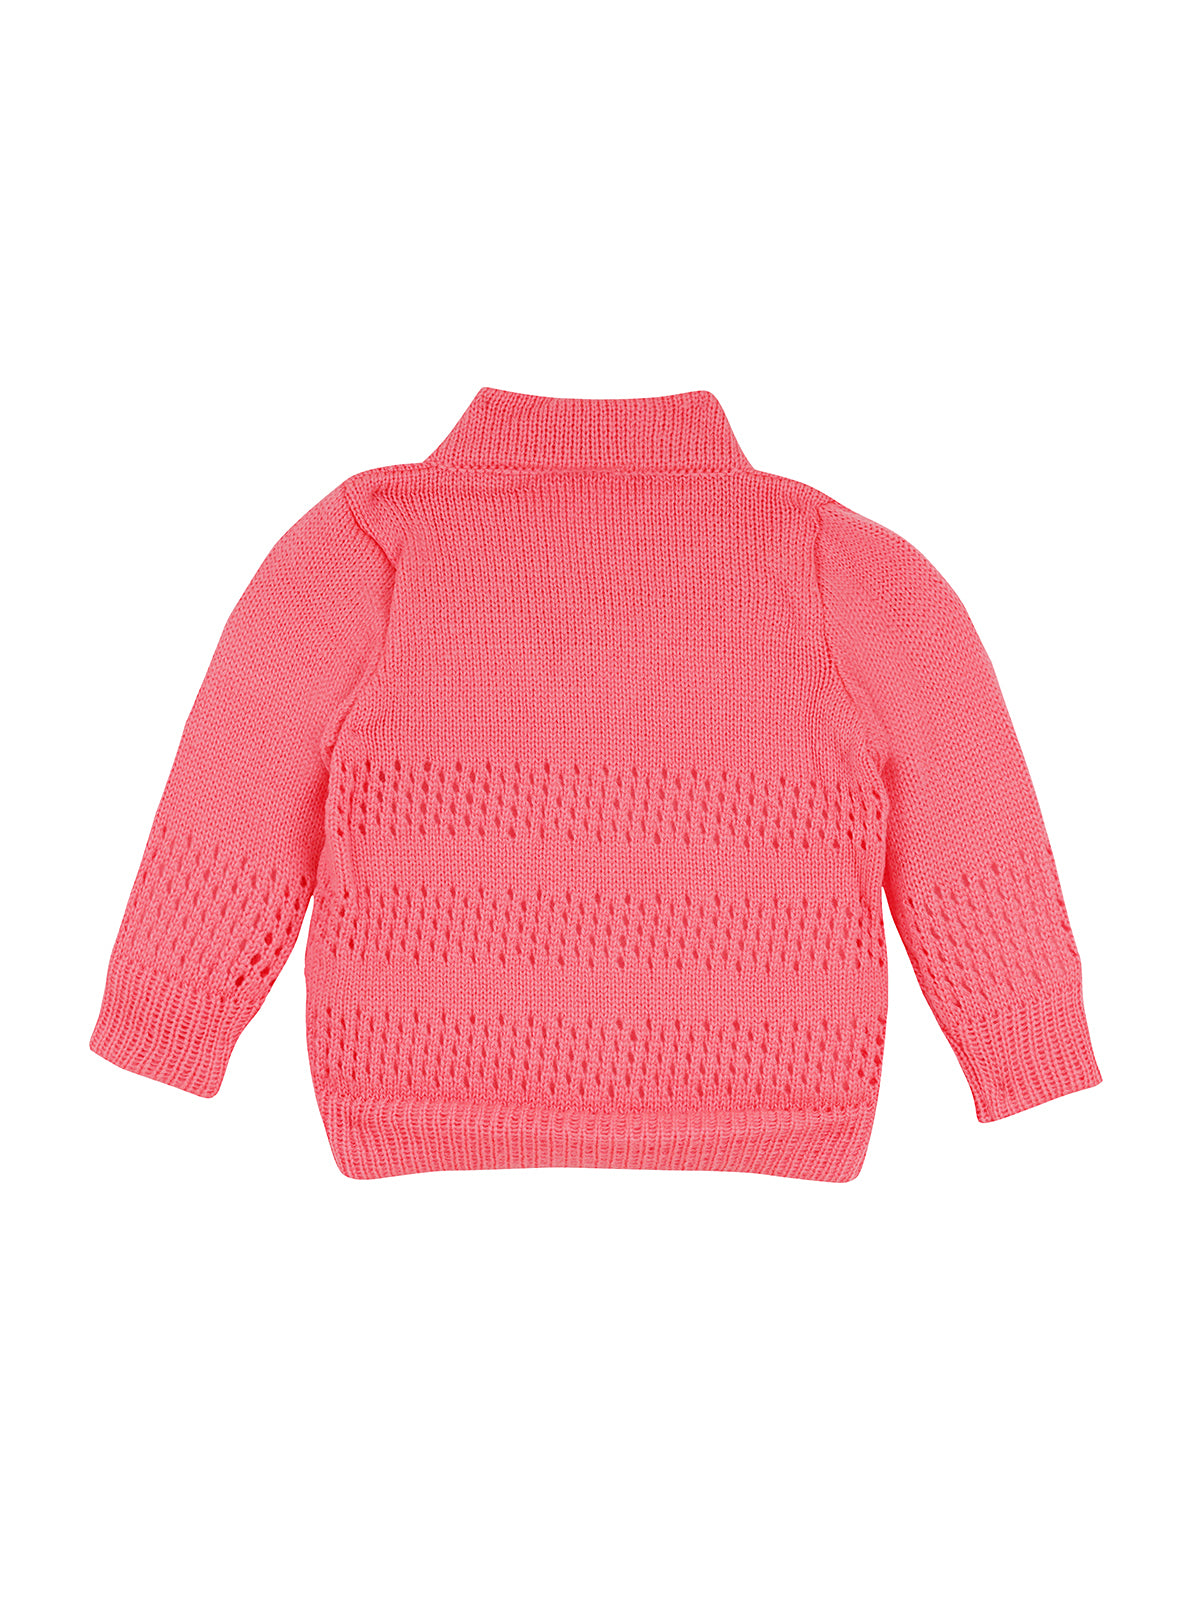 Sweater V-neck Full Sleeve Neon Pink Color with Matching Caps and Socks